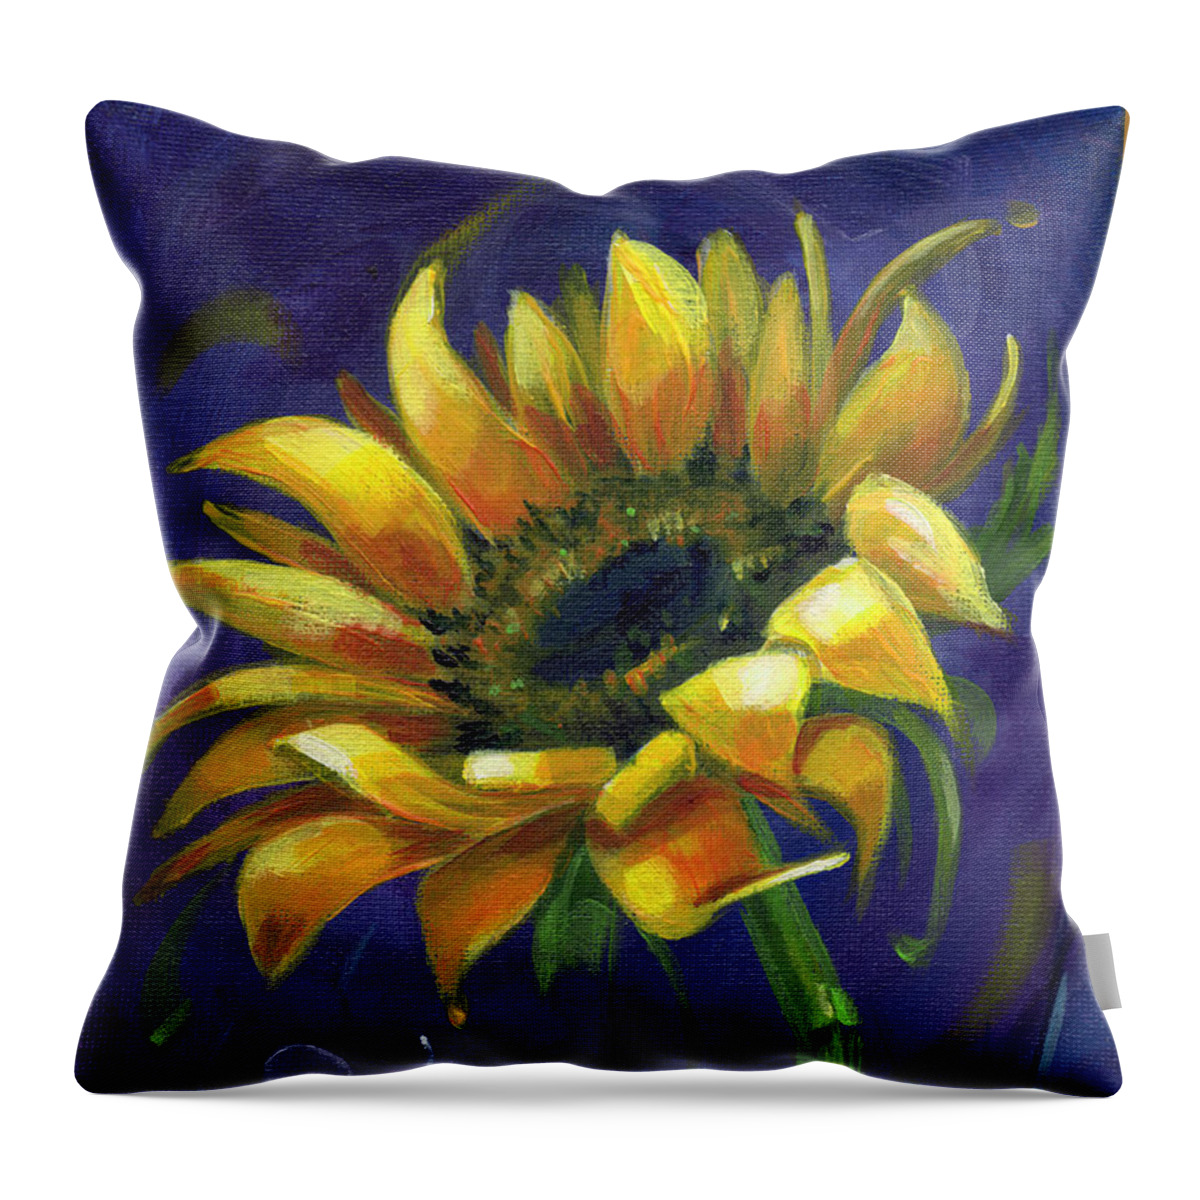 Sunflower Throw Pillow featuring the painting Almost Home - Sunflower Painting by Annie Troe